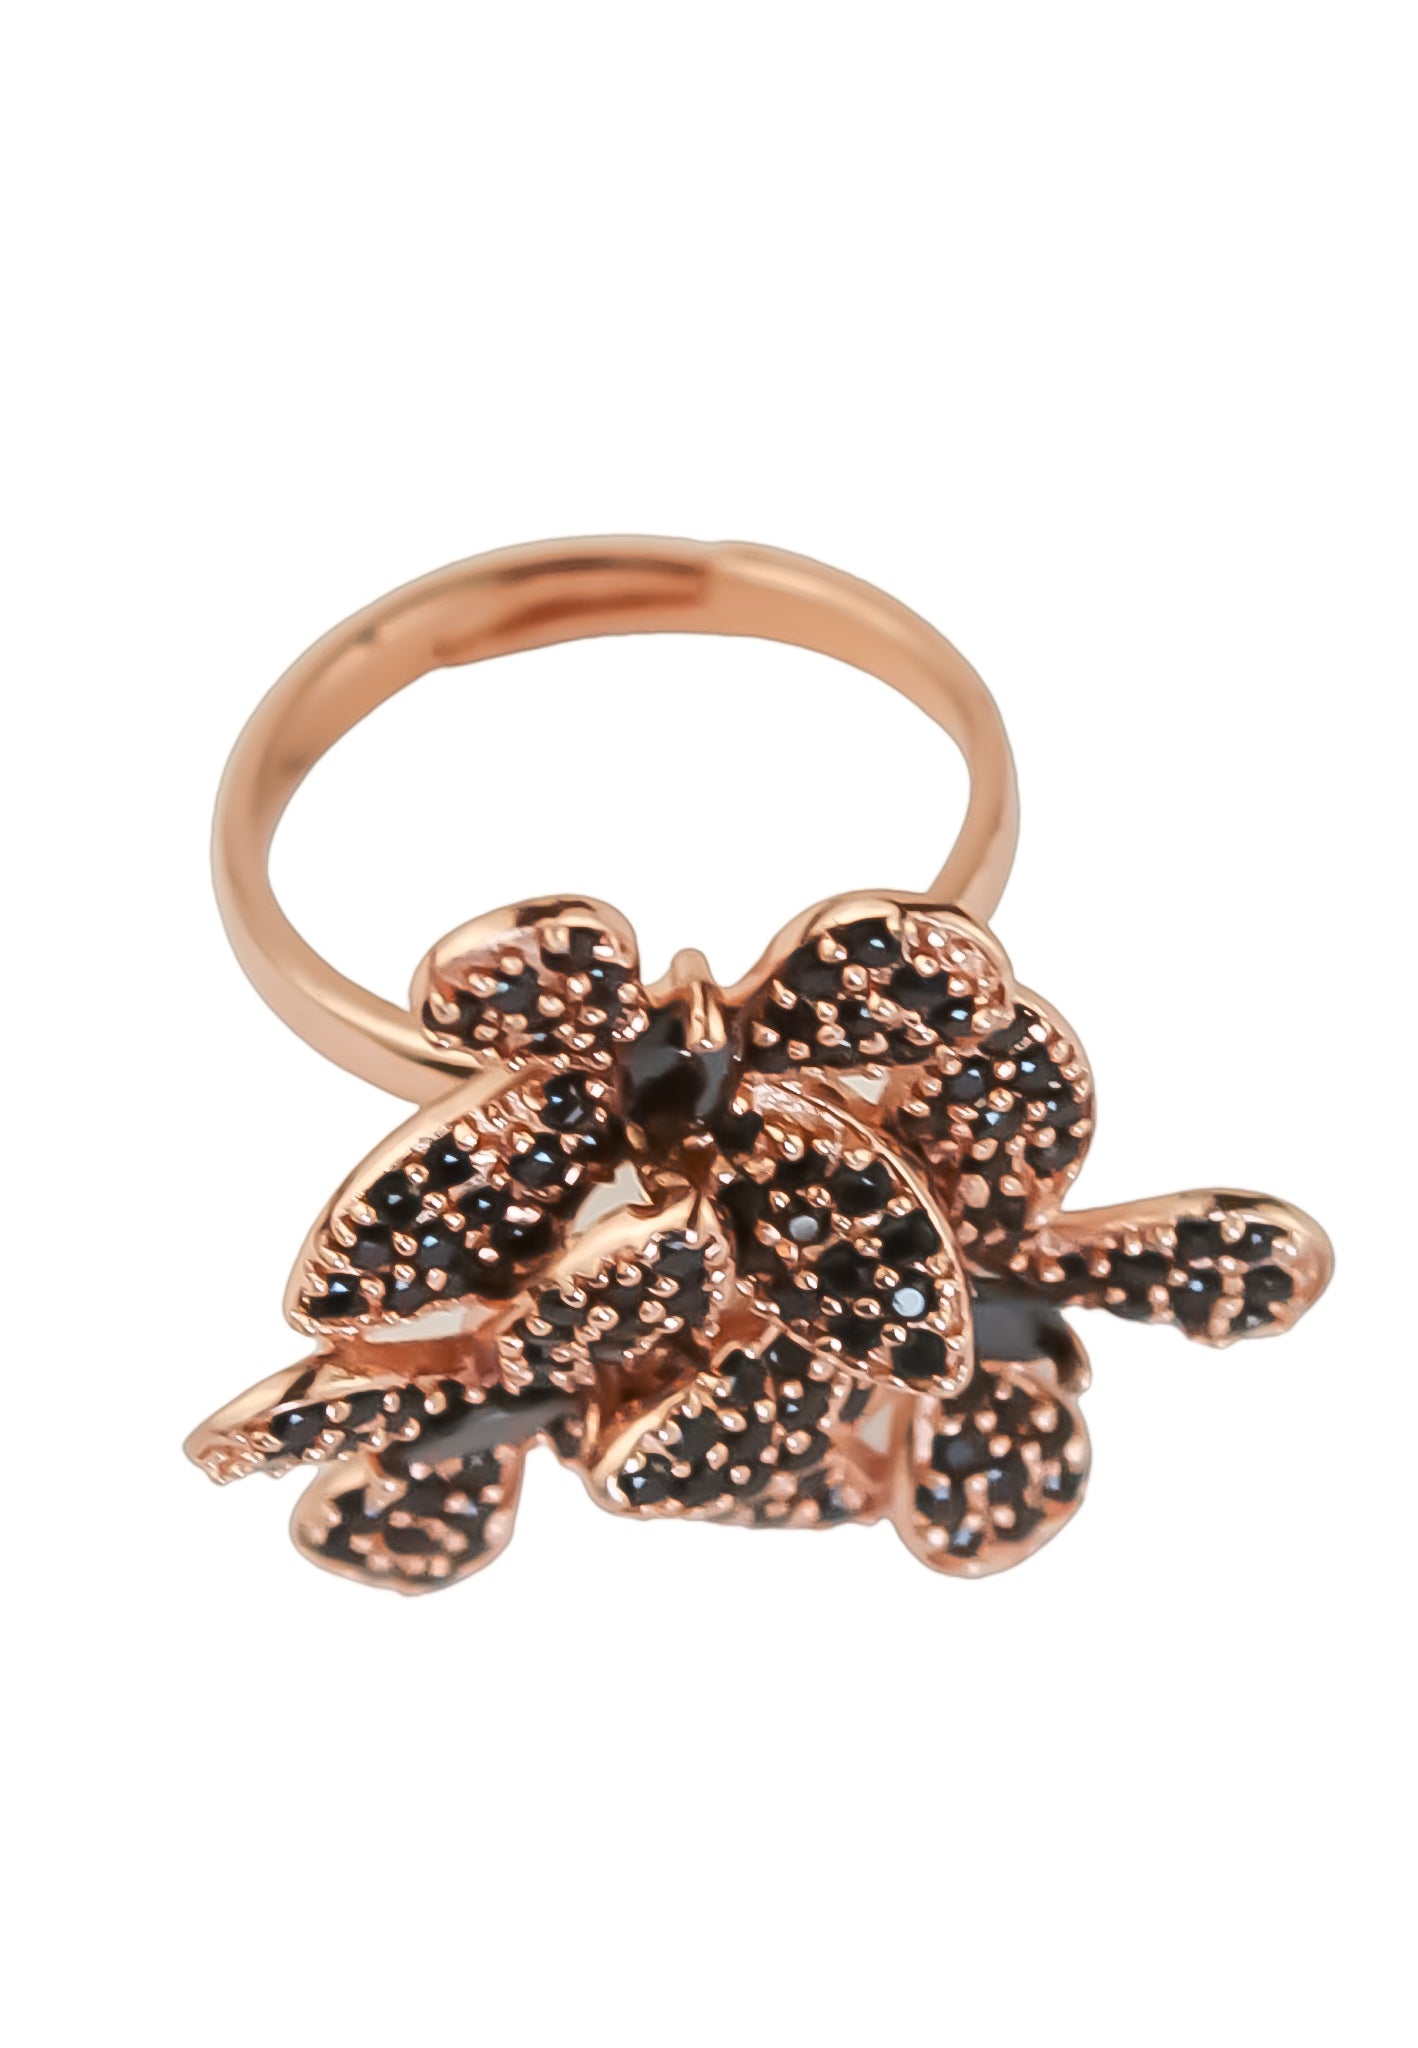 African Butterfly Ring with Zirconia Stones - Adjustable Size, Gold or Silver Plated Bijou Her